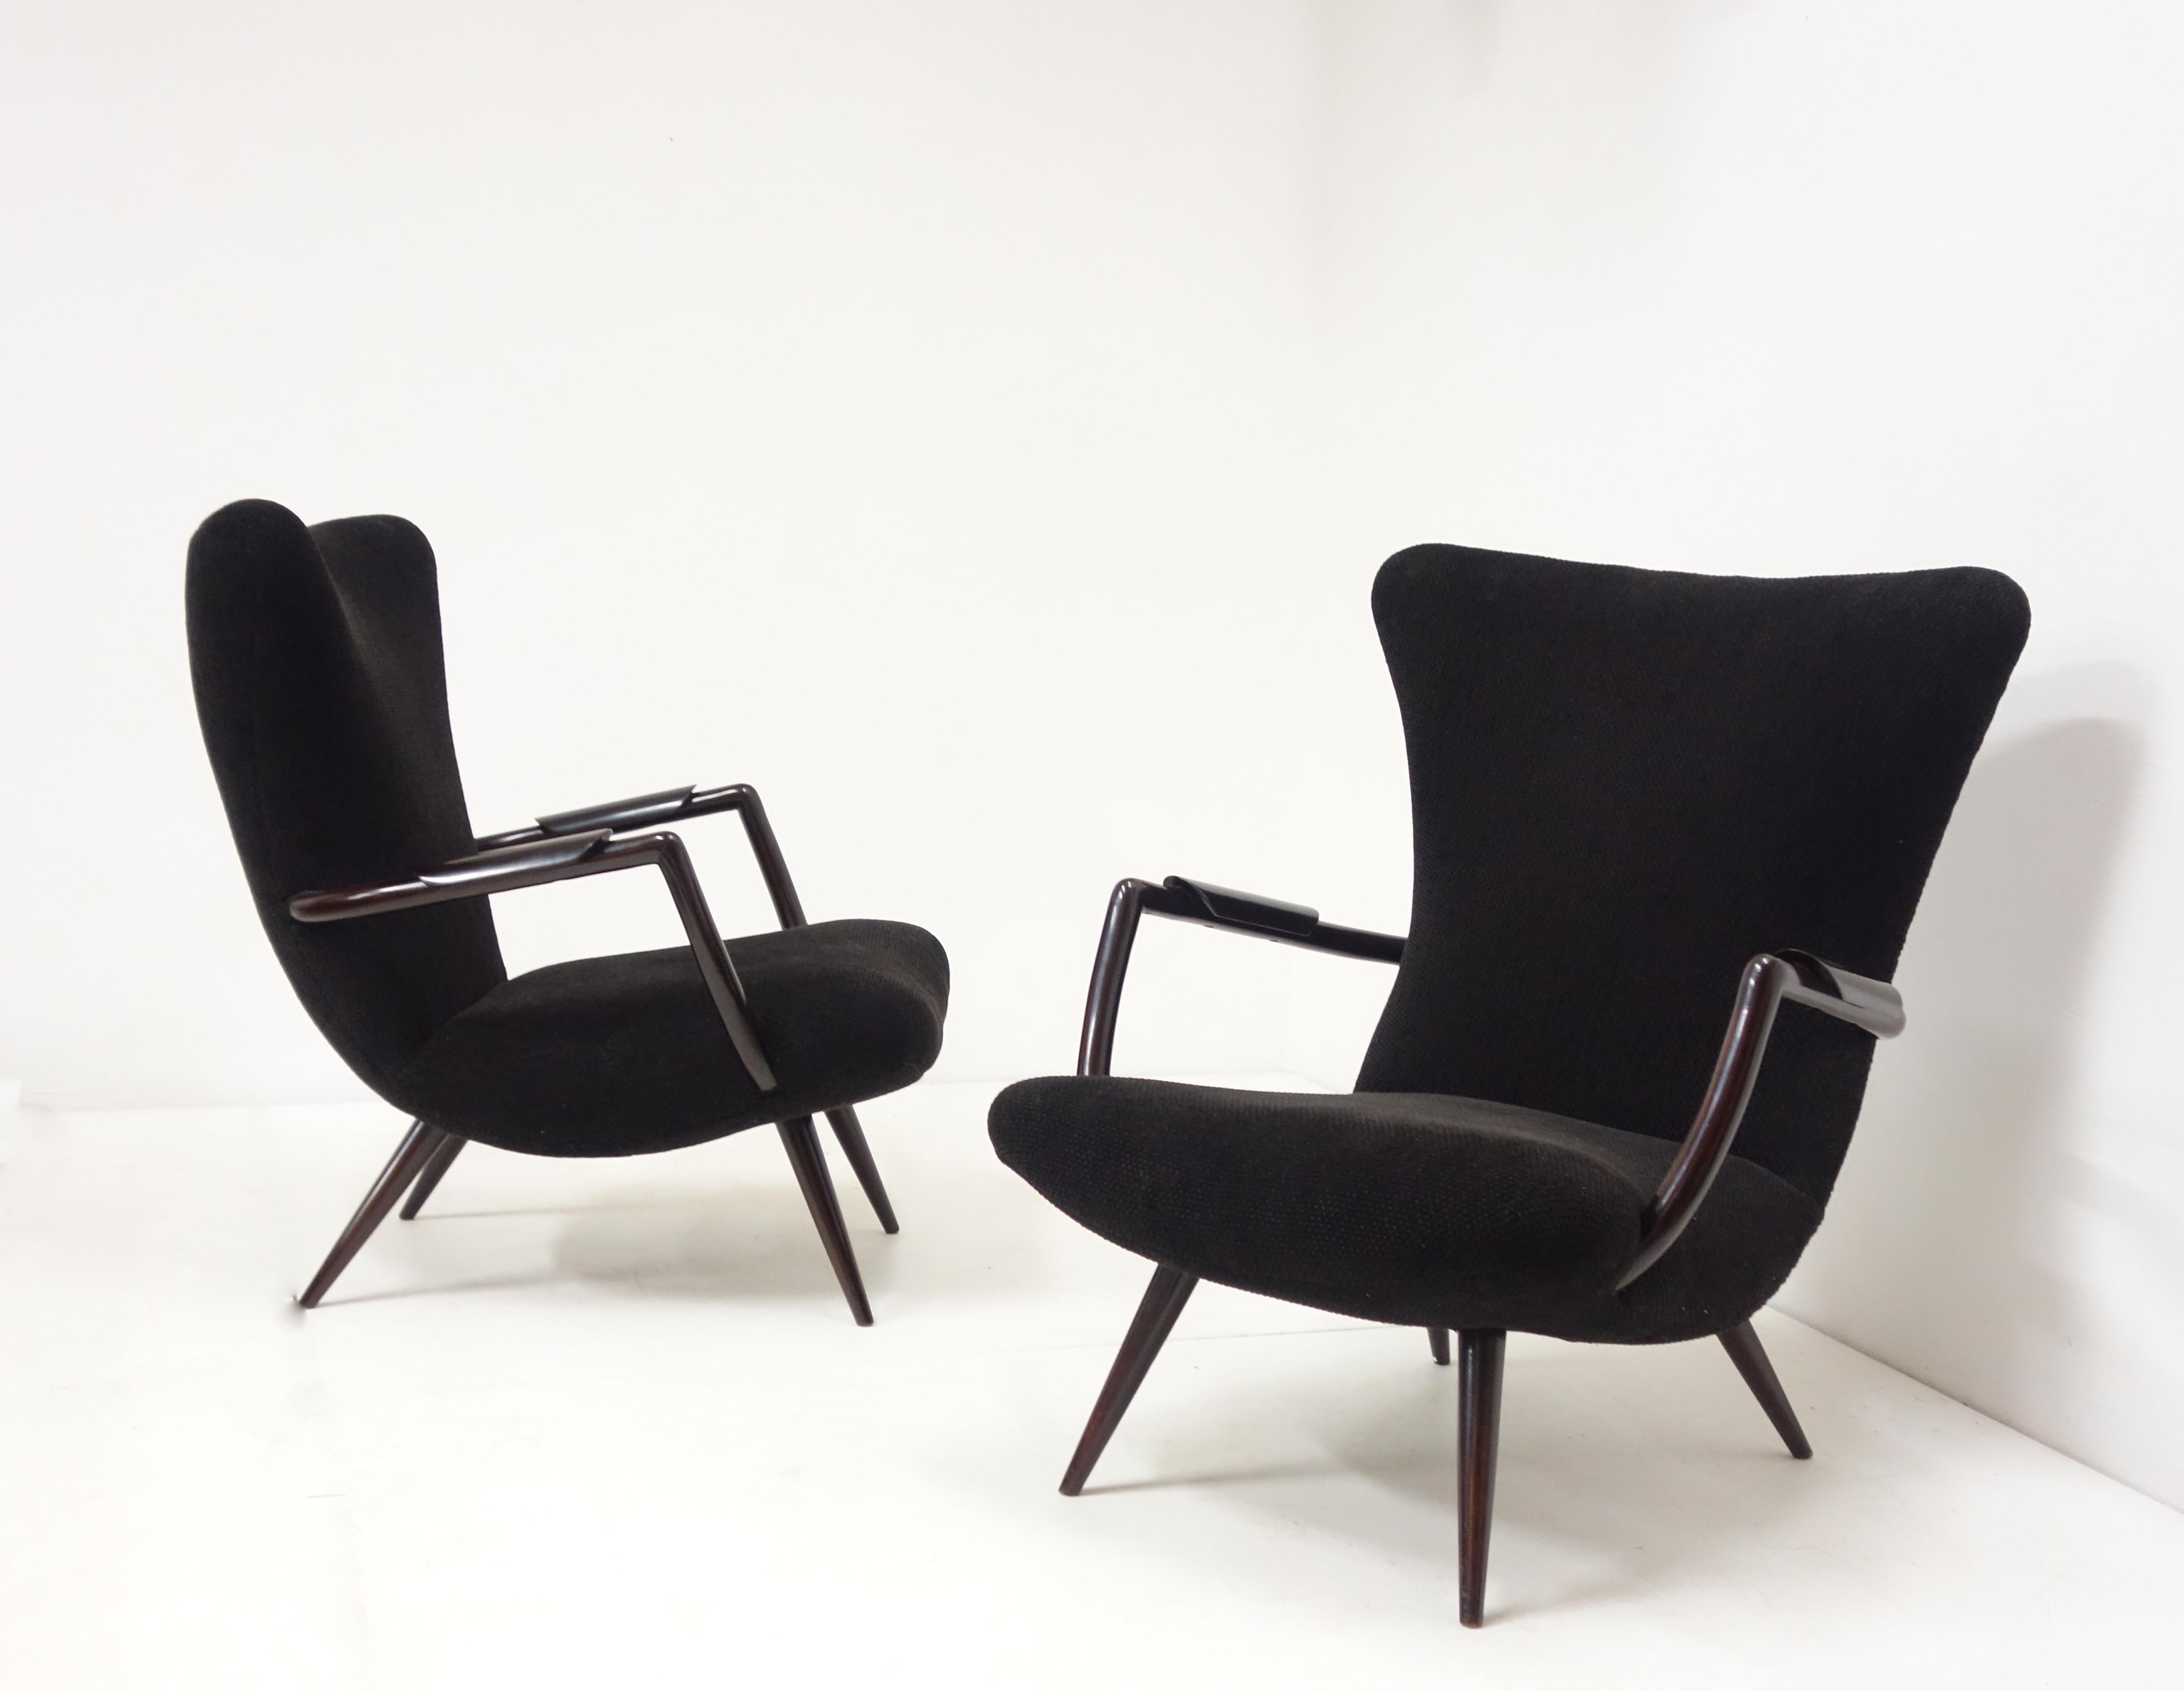 Pair of armchairs in blackened caviuna. The seat, as the curved and high back are upholstered with a knit dark fabric. The wood legs are slender and the armrests, also made of wood are curved with a wood cuff.
This elegant pair of armchairs is